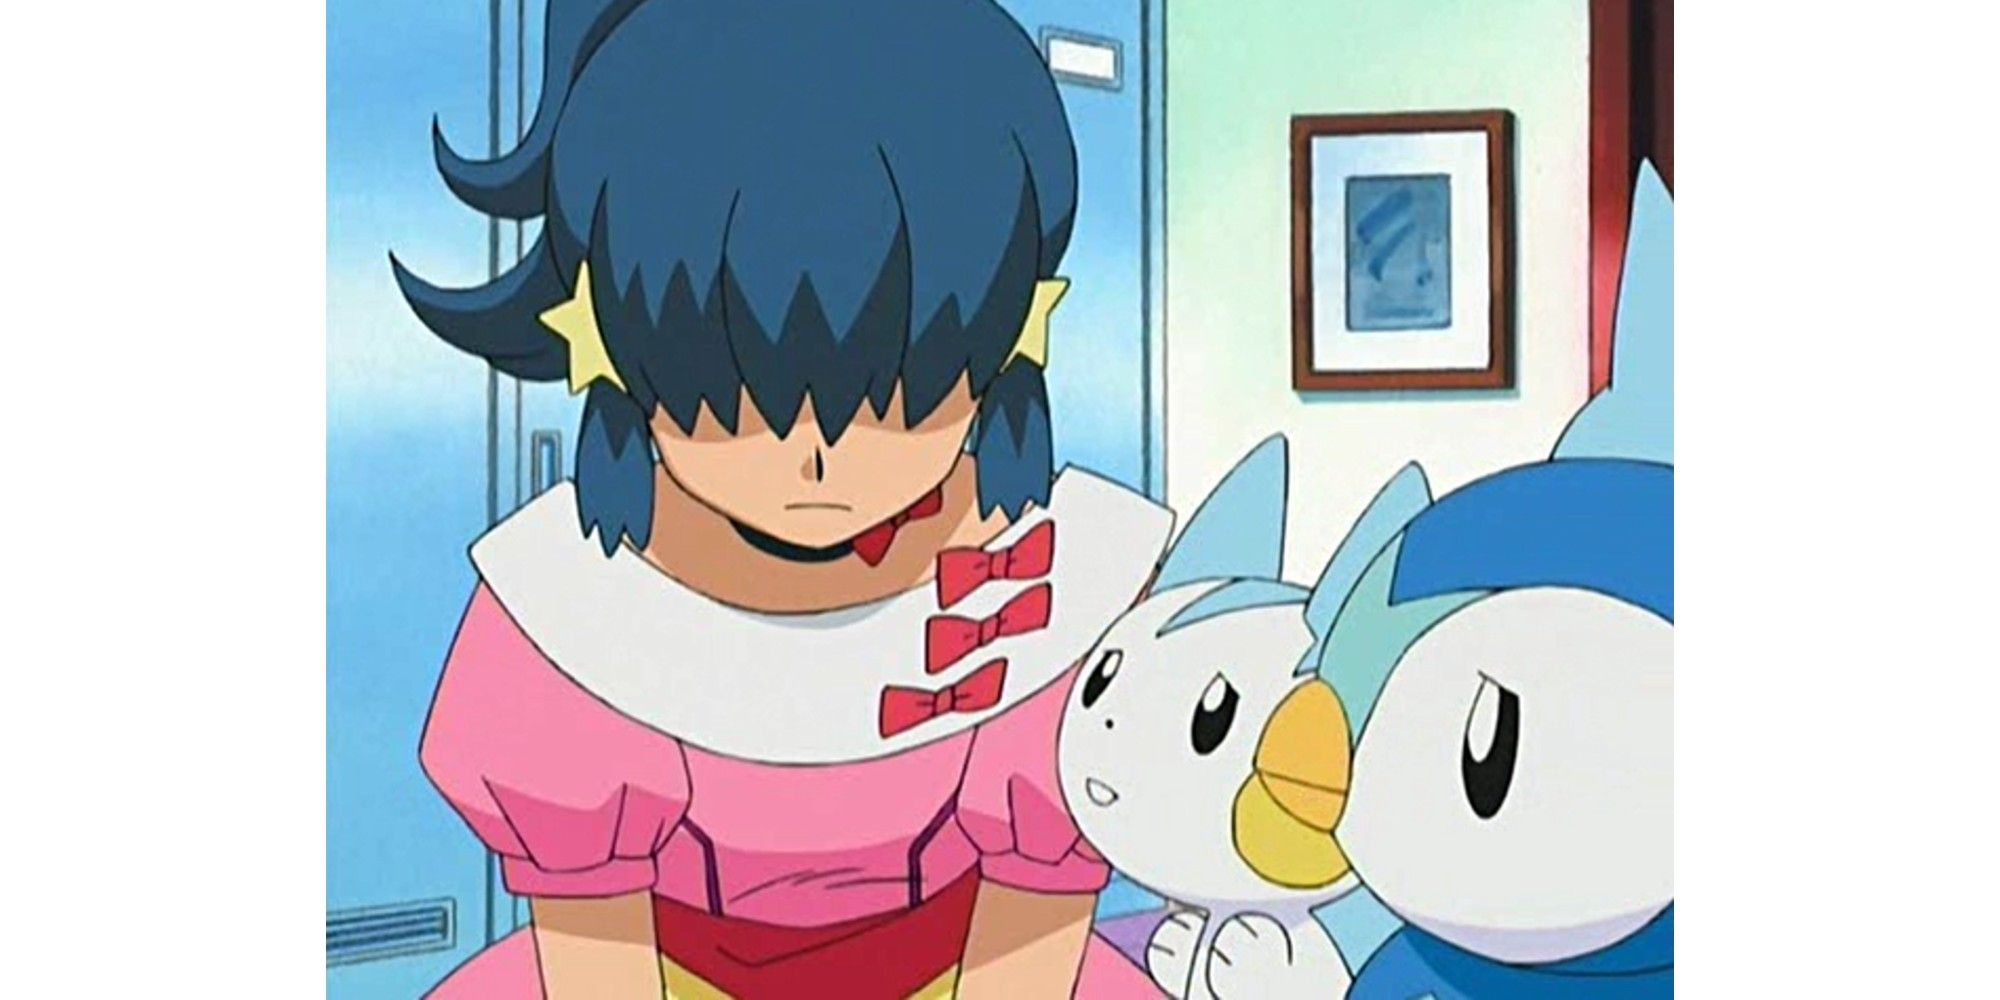 Dawn from the Pokemon anime sits, dejected after losing the Hearthome contest. Piplup and Pachirisu are beside her.